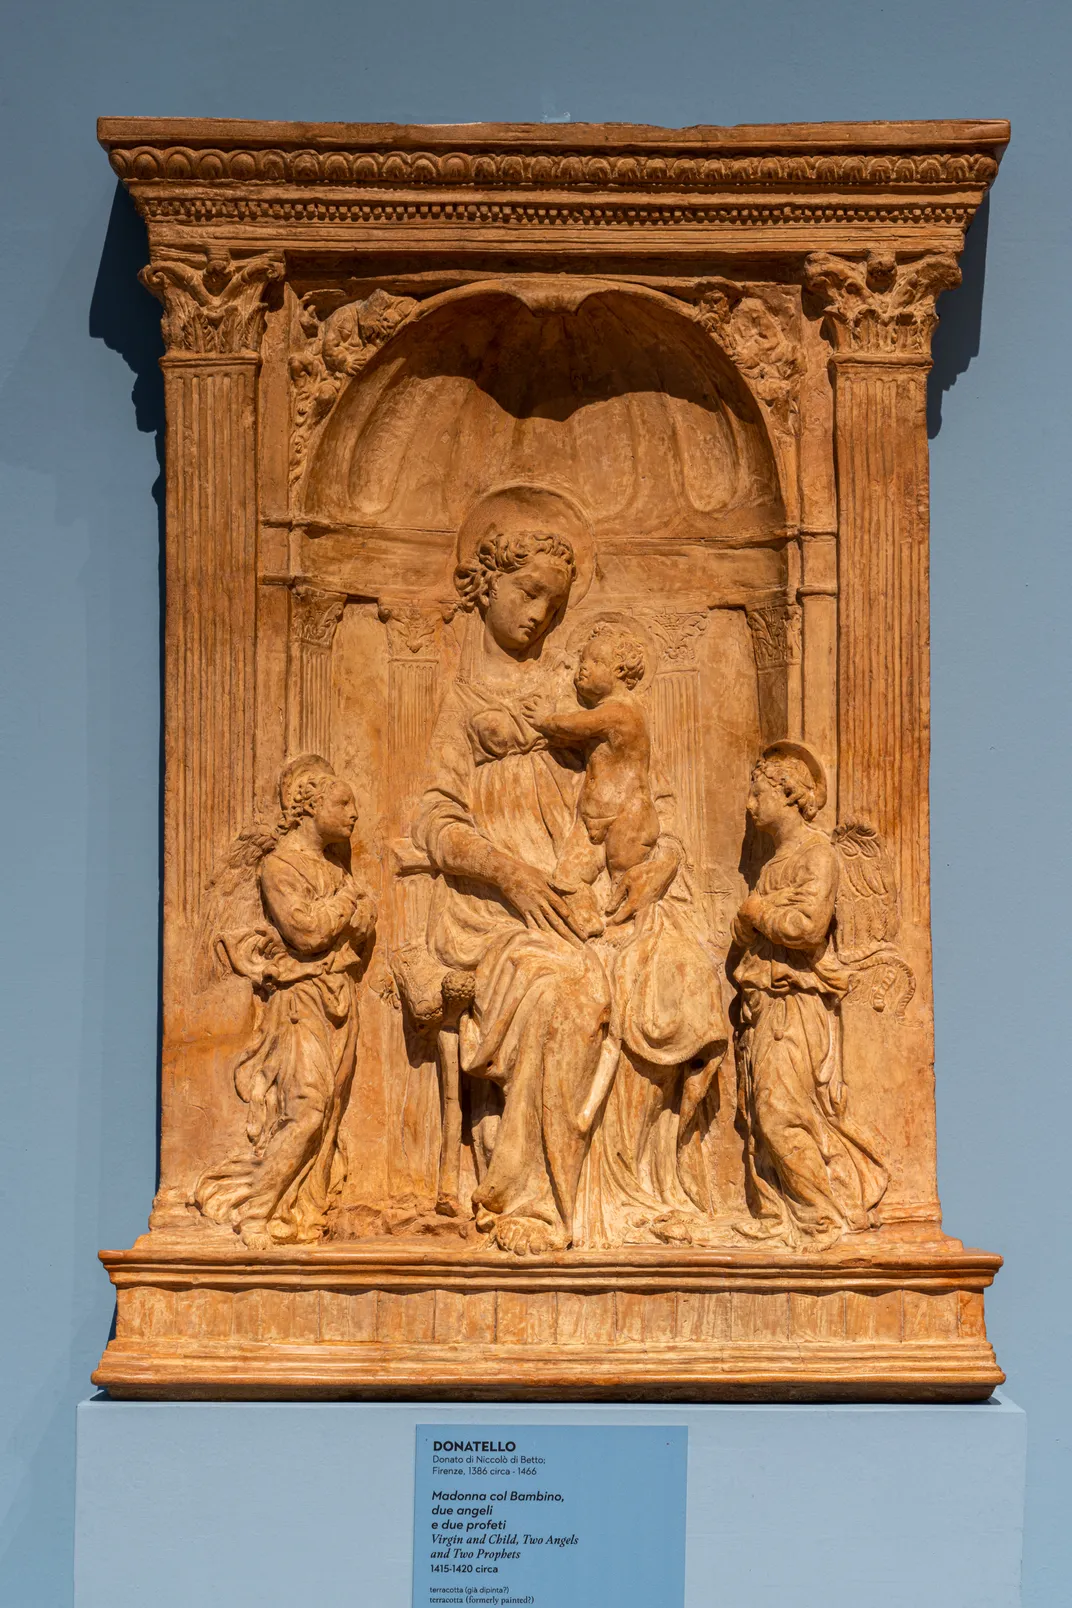 A sculpted relief made from reddish orange terracotta depicting the Virgin Mary seated with a baby Jesus in her lap